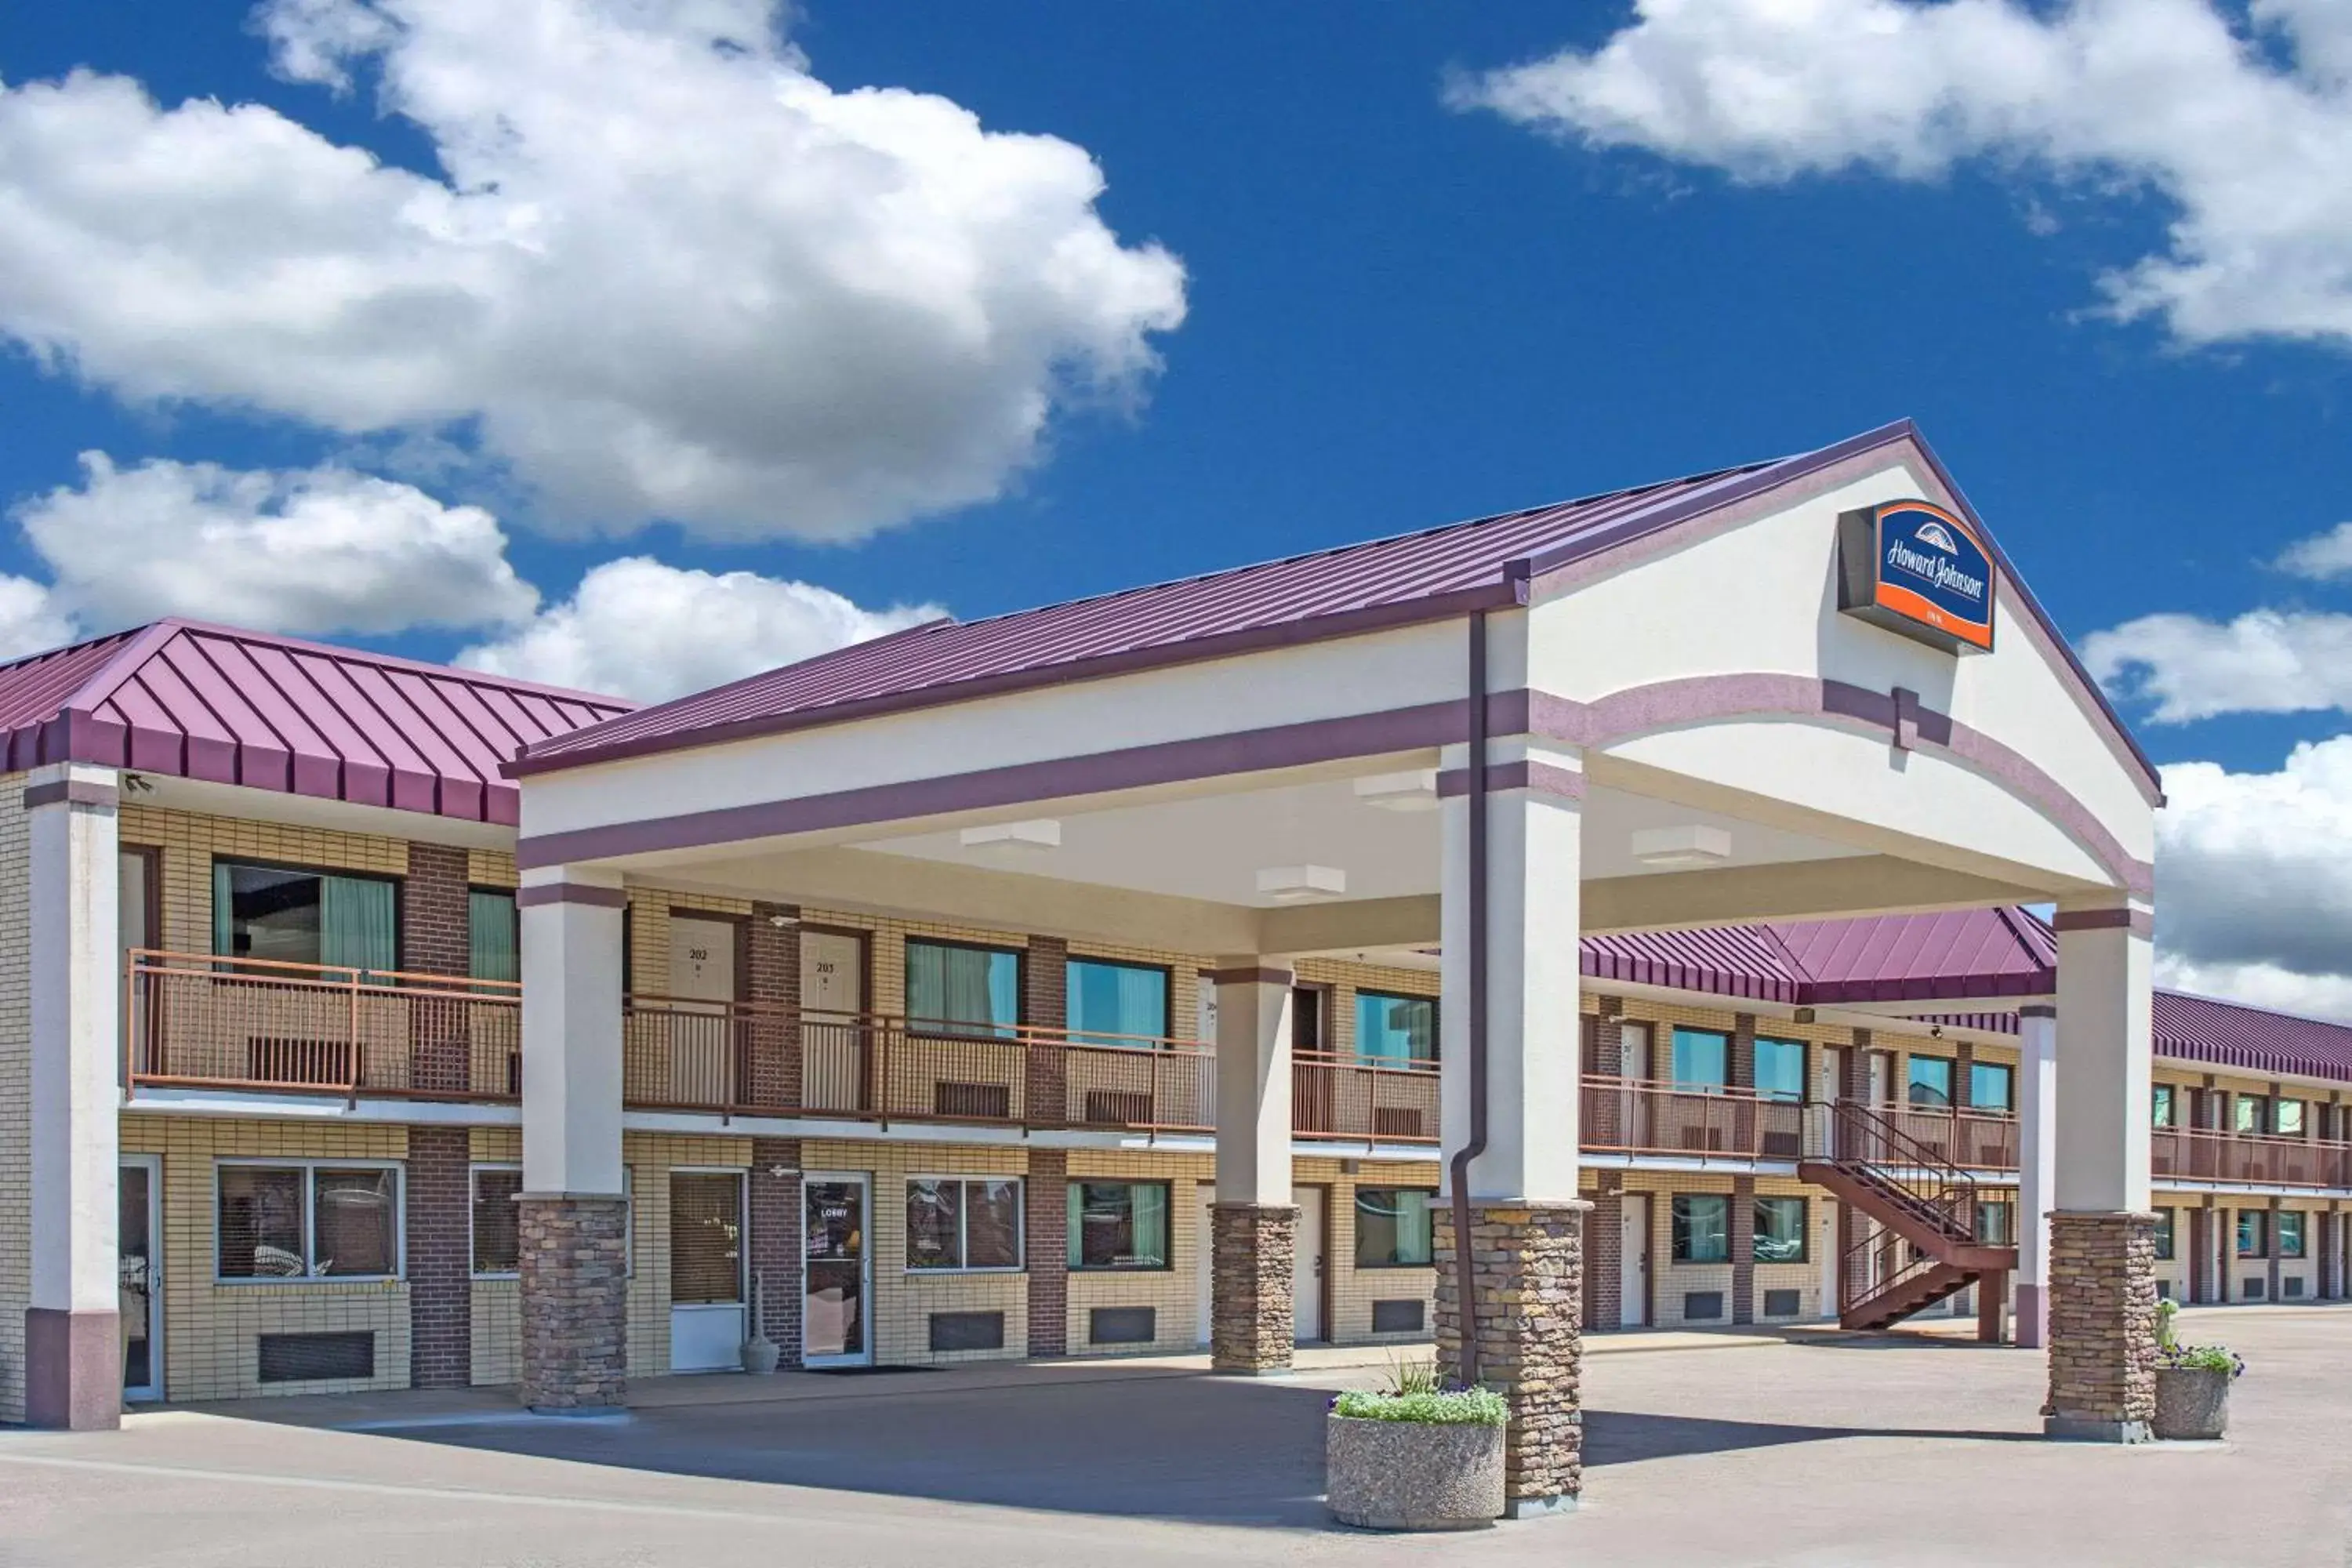 Property Building in North Platte Inn and Suites